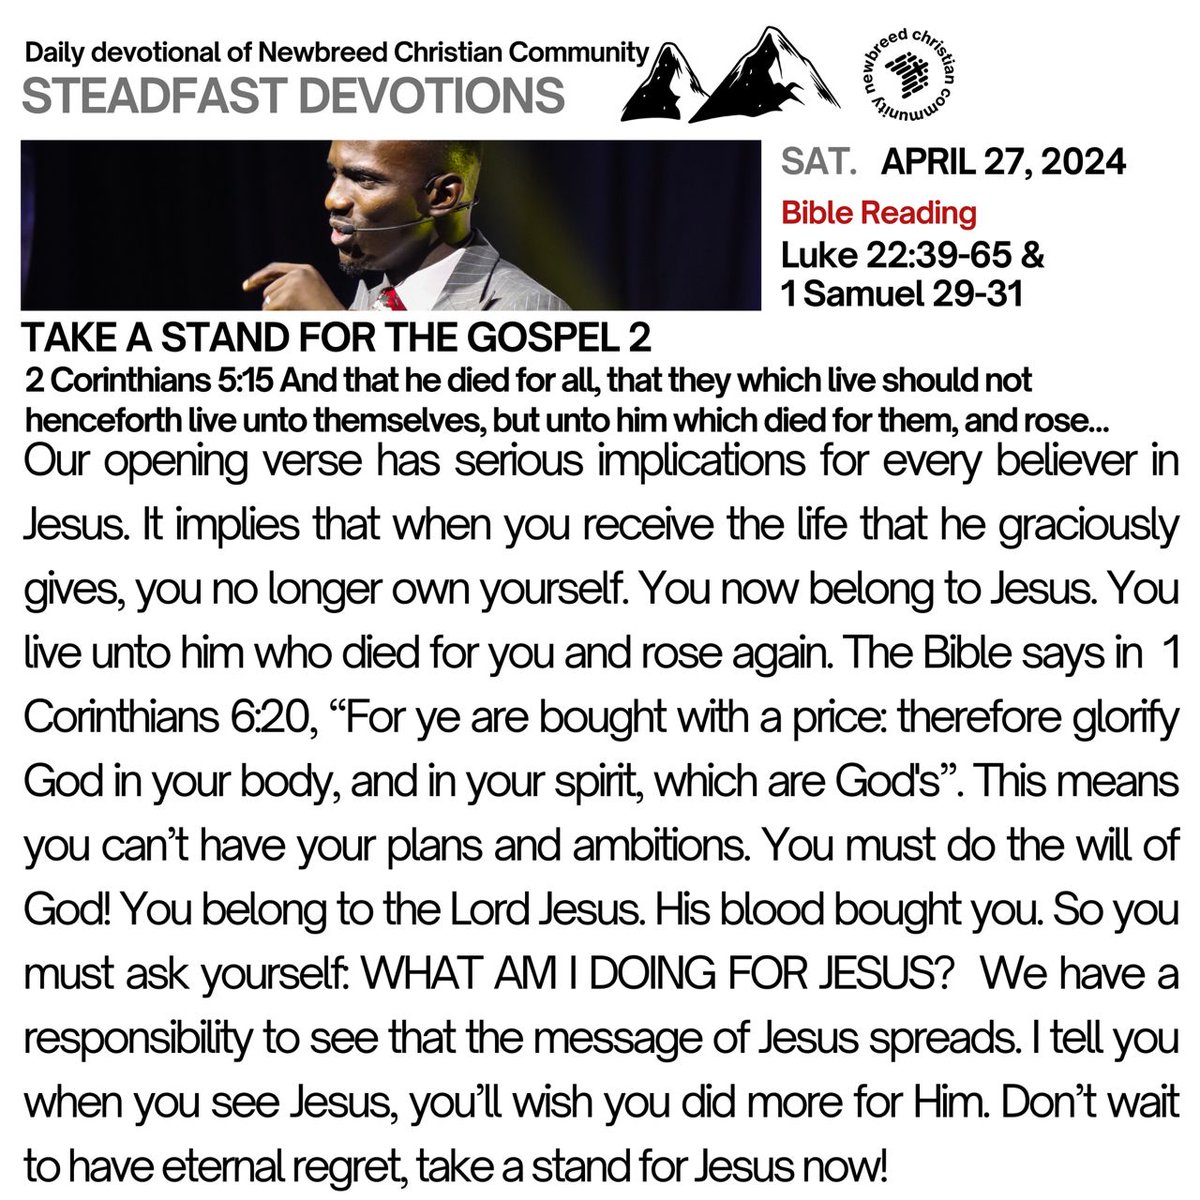 You and I have a responsibility to see the message of Jesus, The Gospel spreads all around us🔥🙏. 

#NBCC
#Steadfastdevotions
#TakeAStandforTheGospel